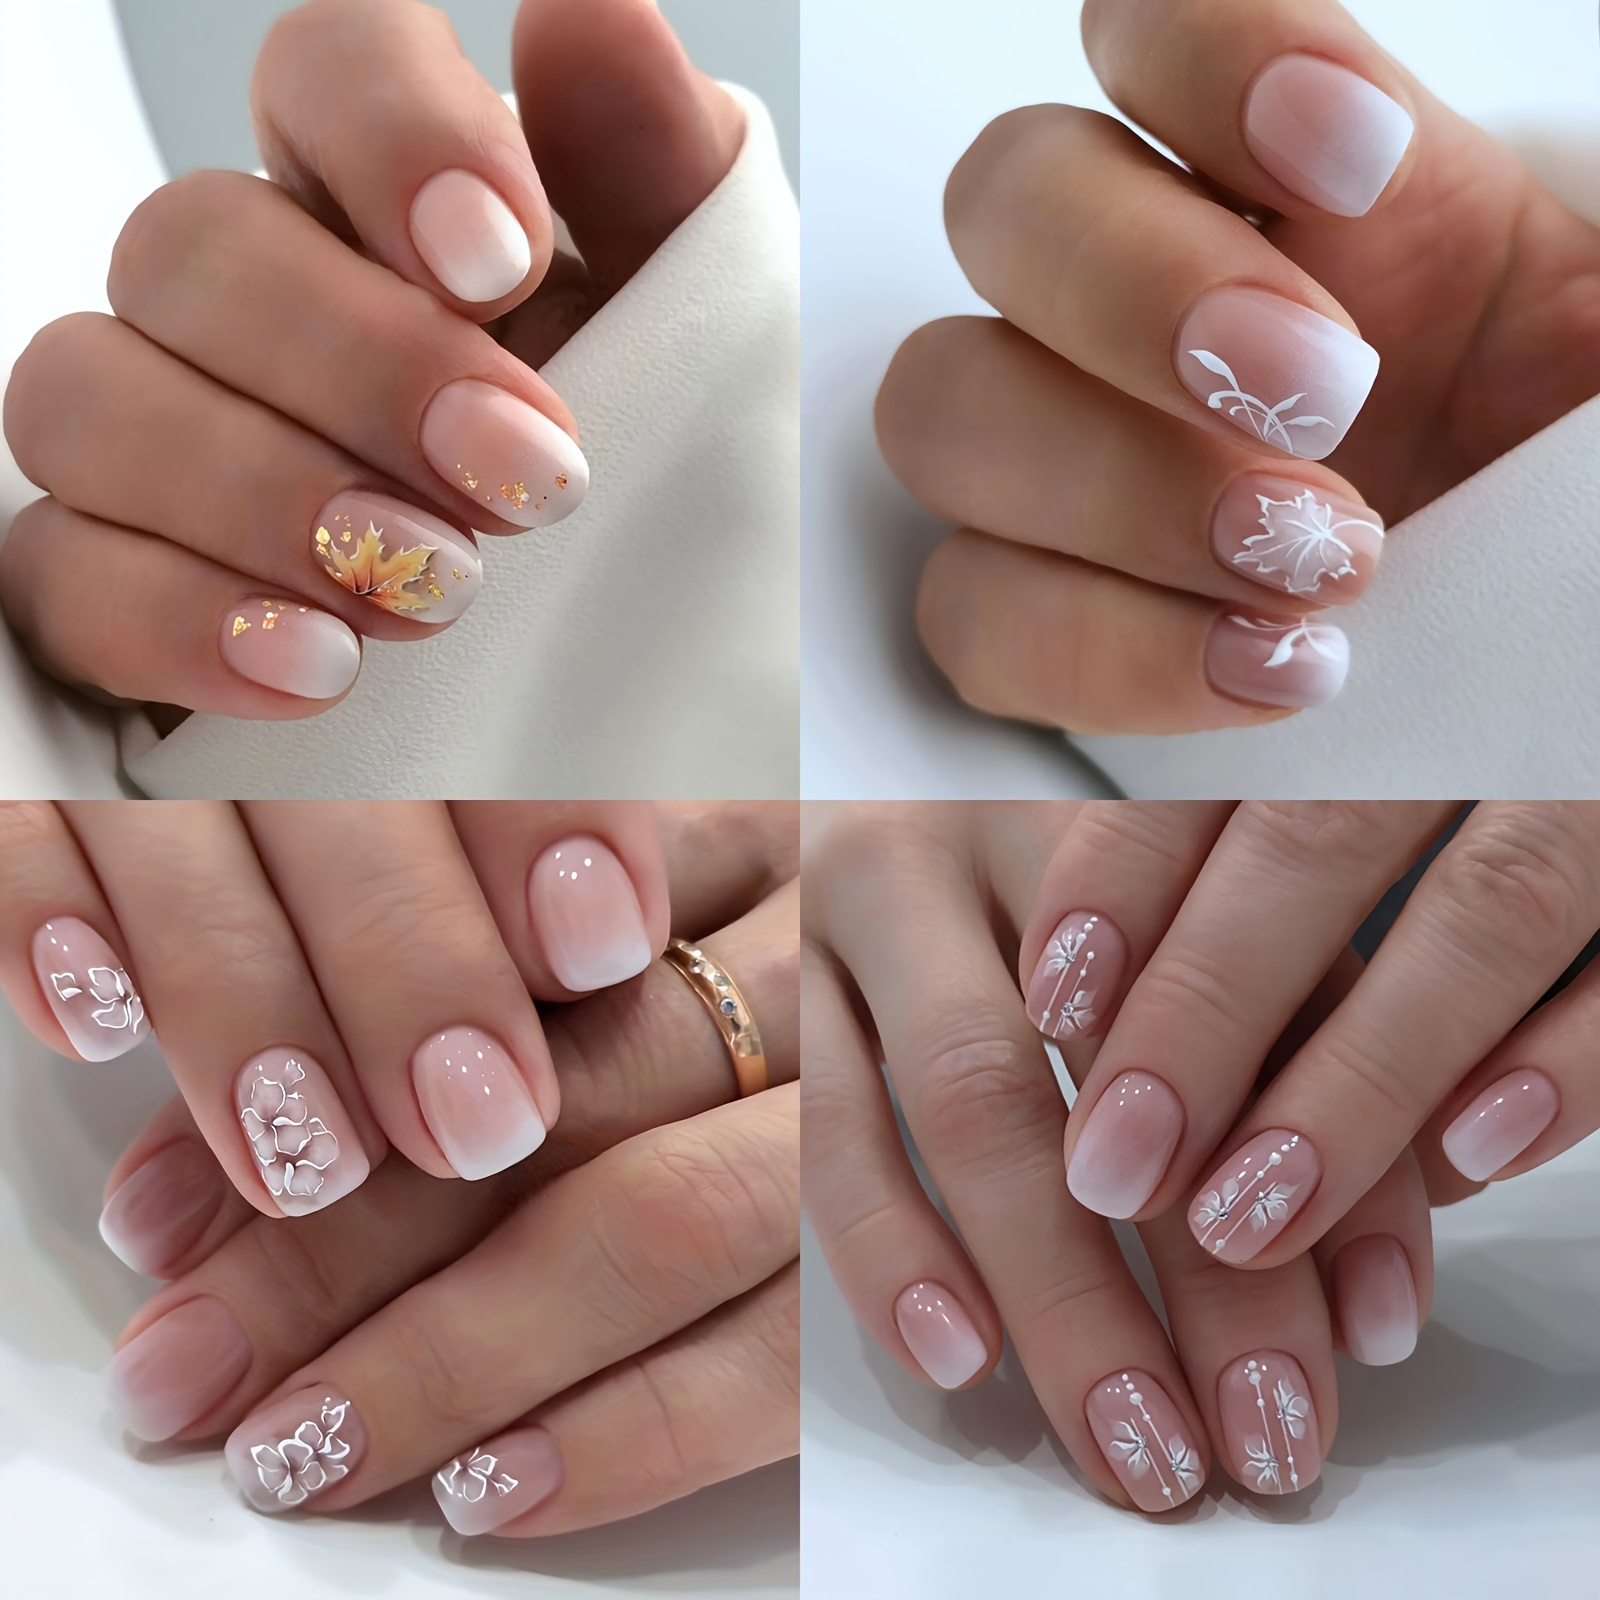 

4 Packs (96 Pcs) Glossy Short Square Press On Nails, Nude White Gradient Fake Nails With Flower, Maple Leaf Design, Sweet False Nails Valentine's Day For Women Girls For Easter